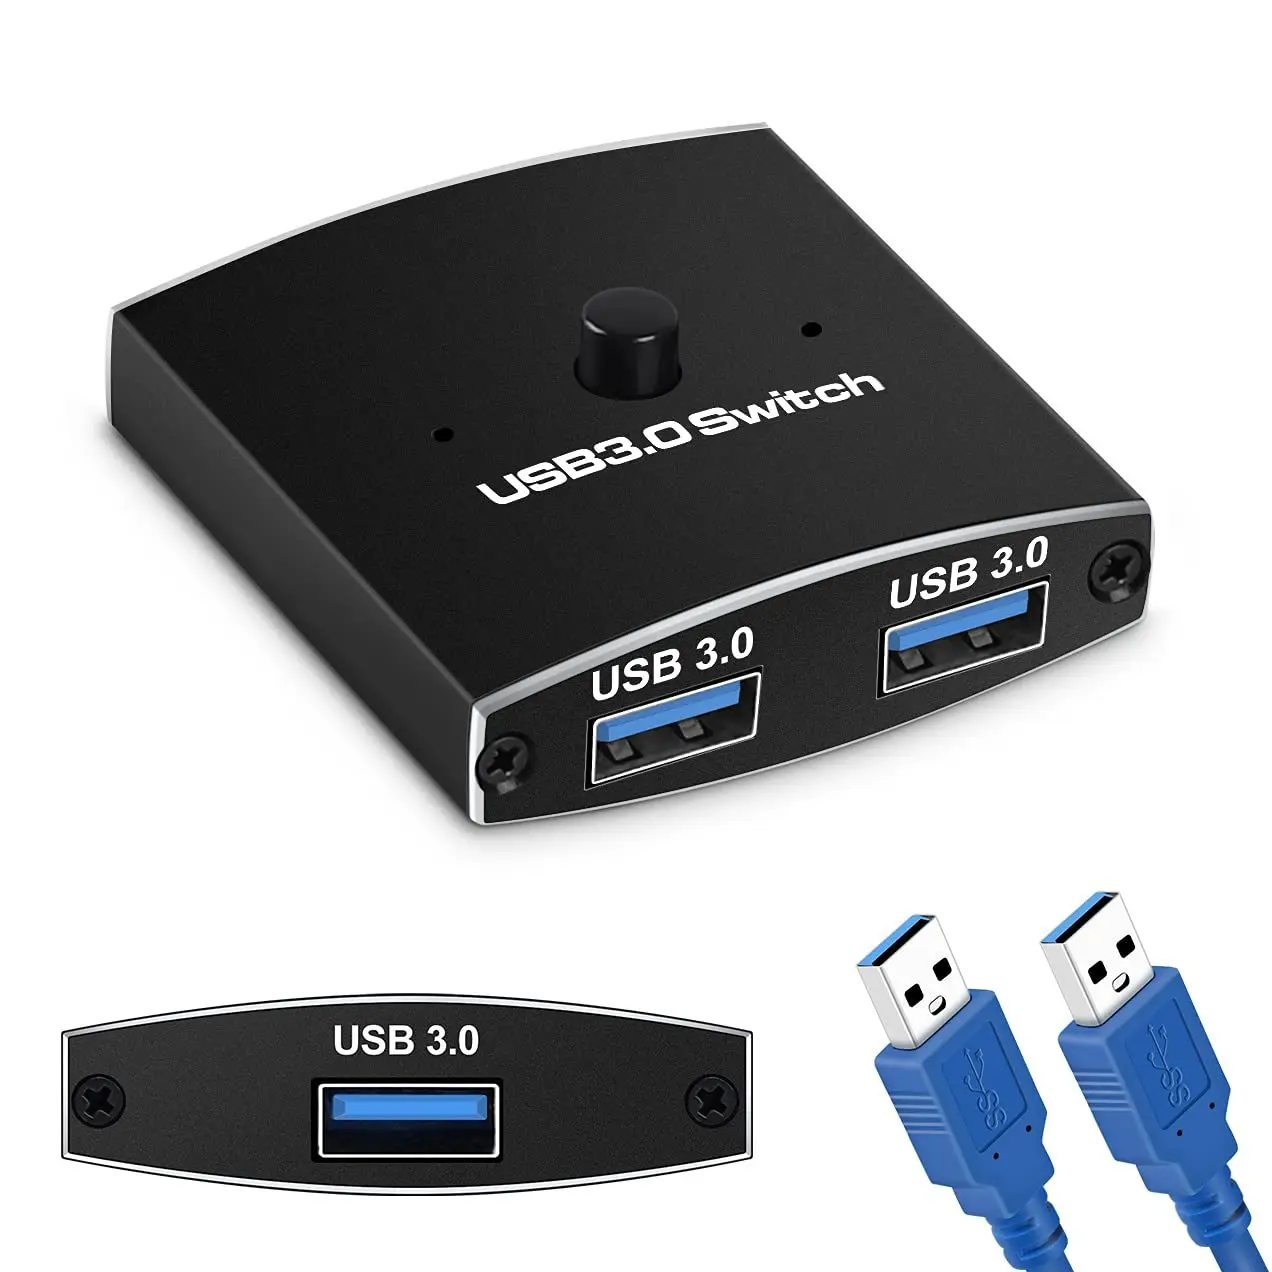 Wholesale USB3.0 Switch Bidirectional Switcher Selector with One Button for Keyboard Mouse Scanner Printer m.alibaba.com